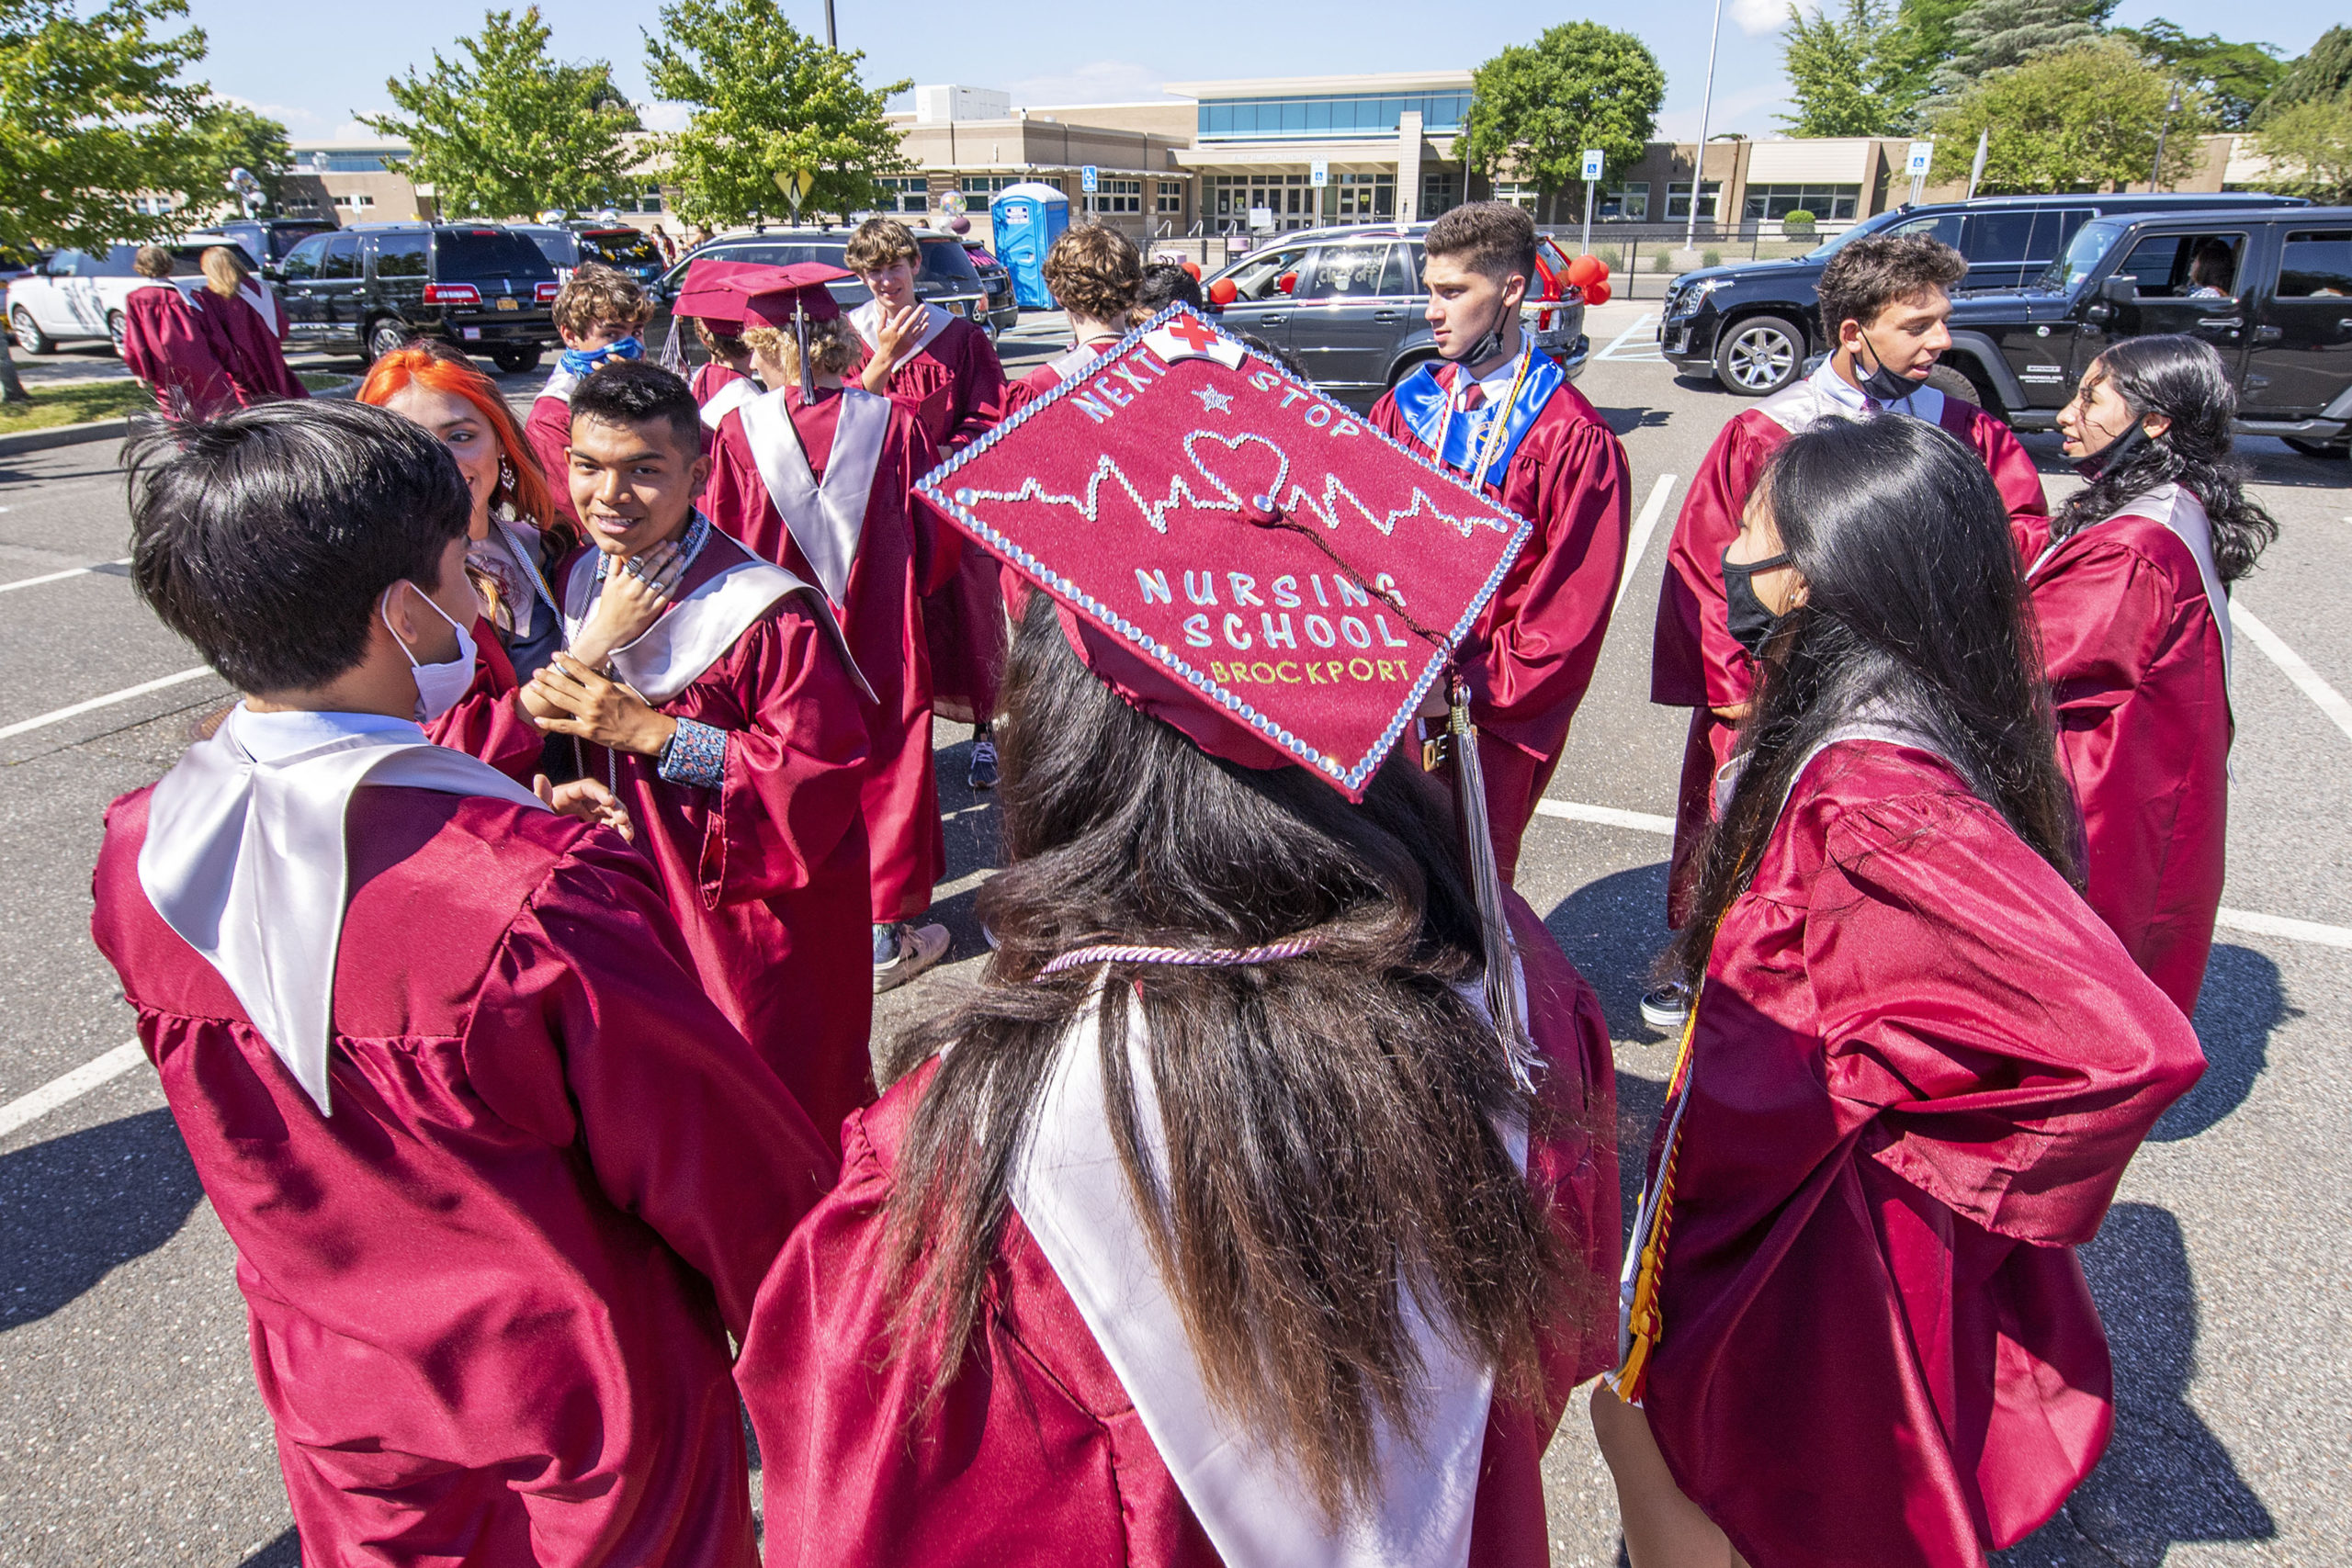 East Hampton High School Senior Tia Weiss proudly shows off her next stop as she greets her classmates in the parking lot as she gets ready to participate in the 2020 graduation ceremony at the East Hampton High School on Friday.